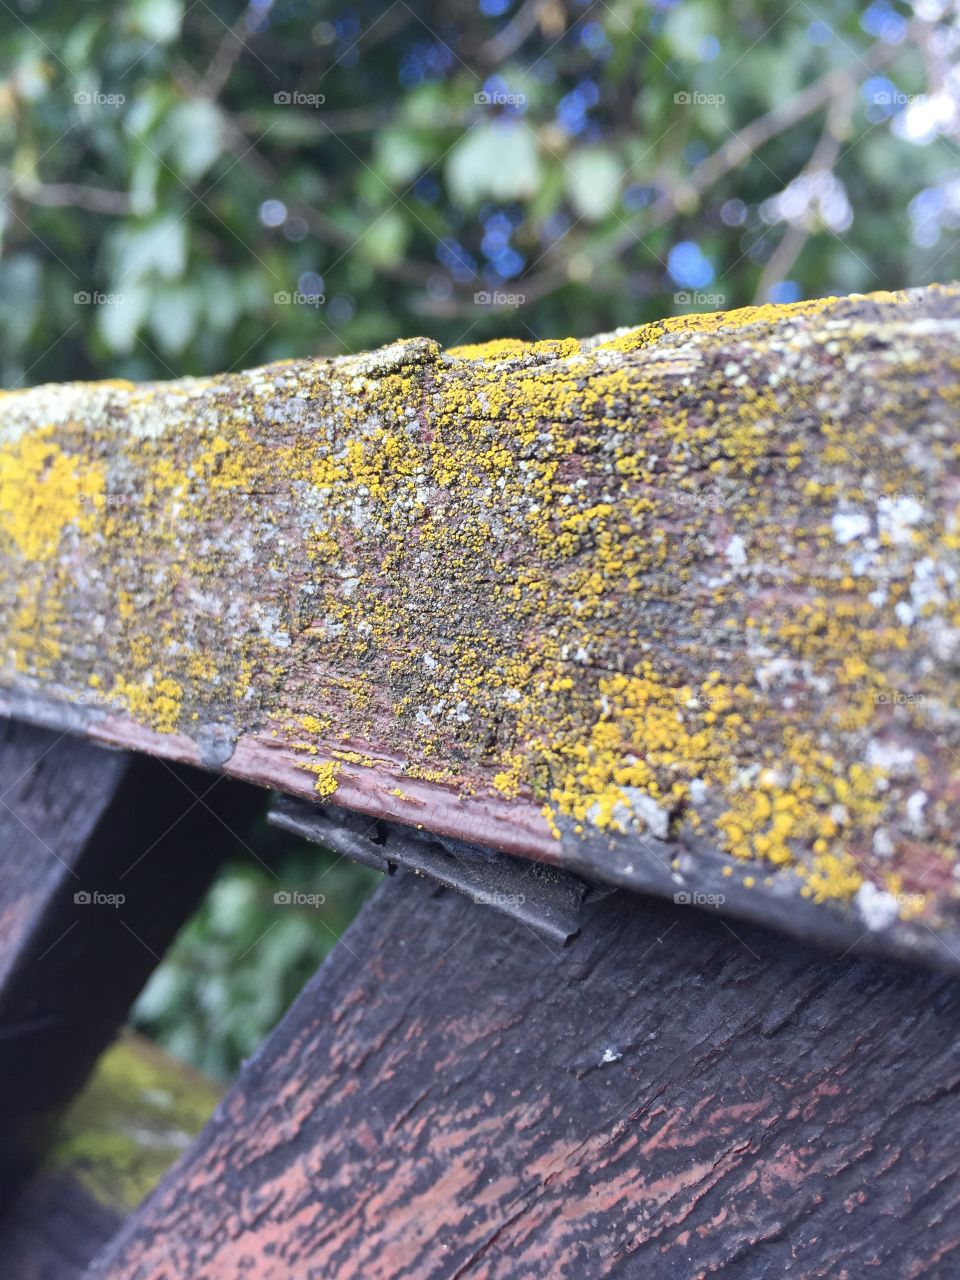 Spotted moss covering a dead painted fence